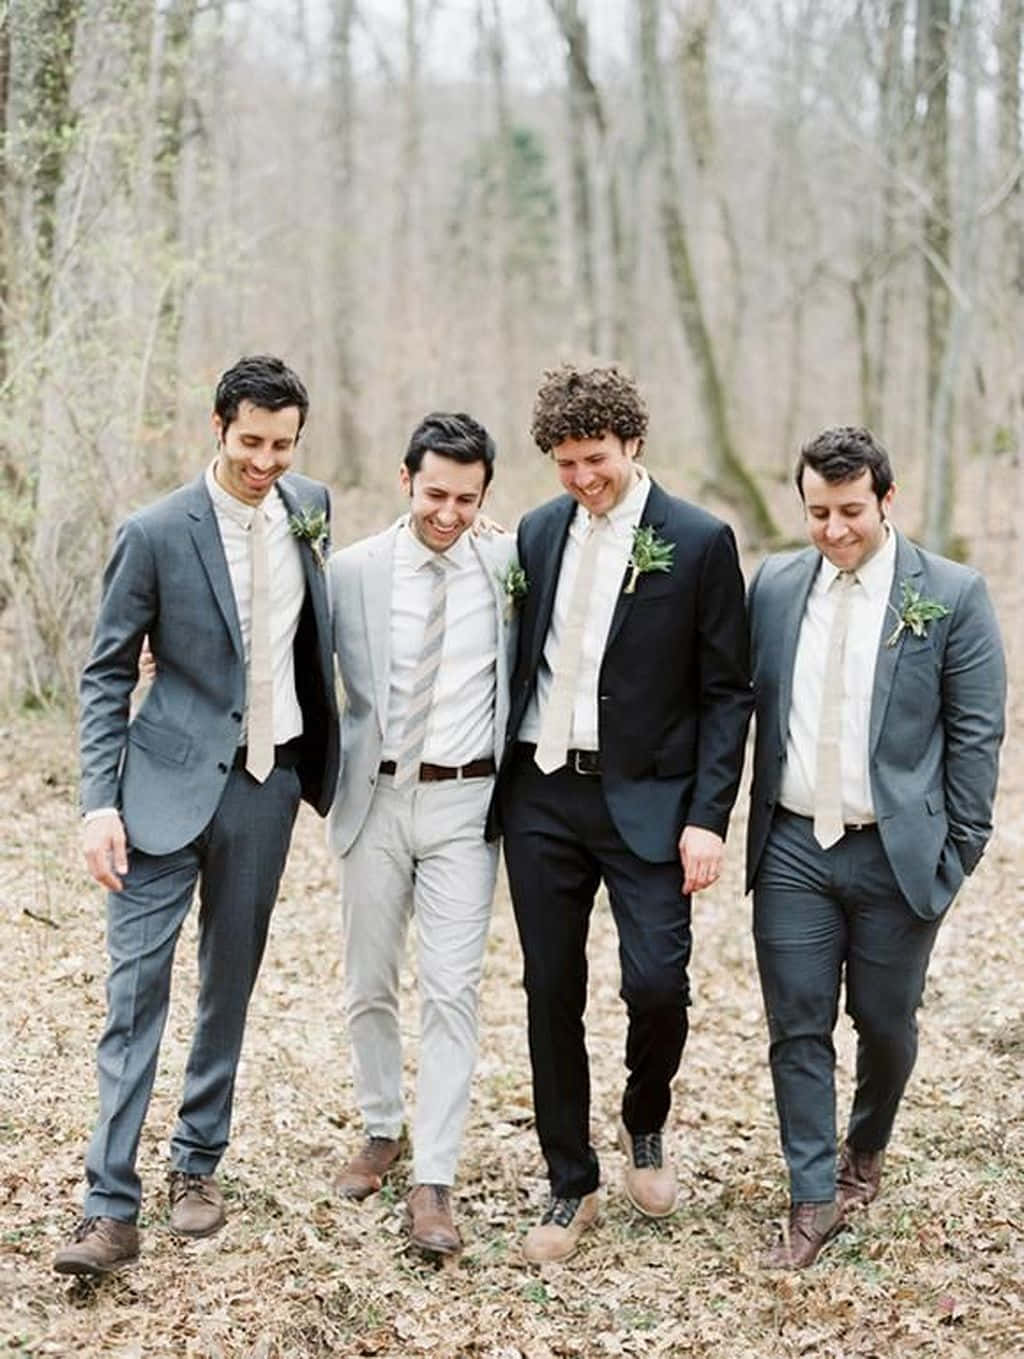 A group of happy groomsmen enjoying their special day.